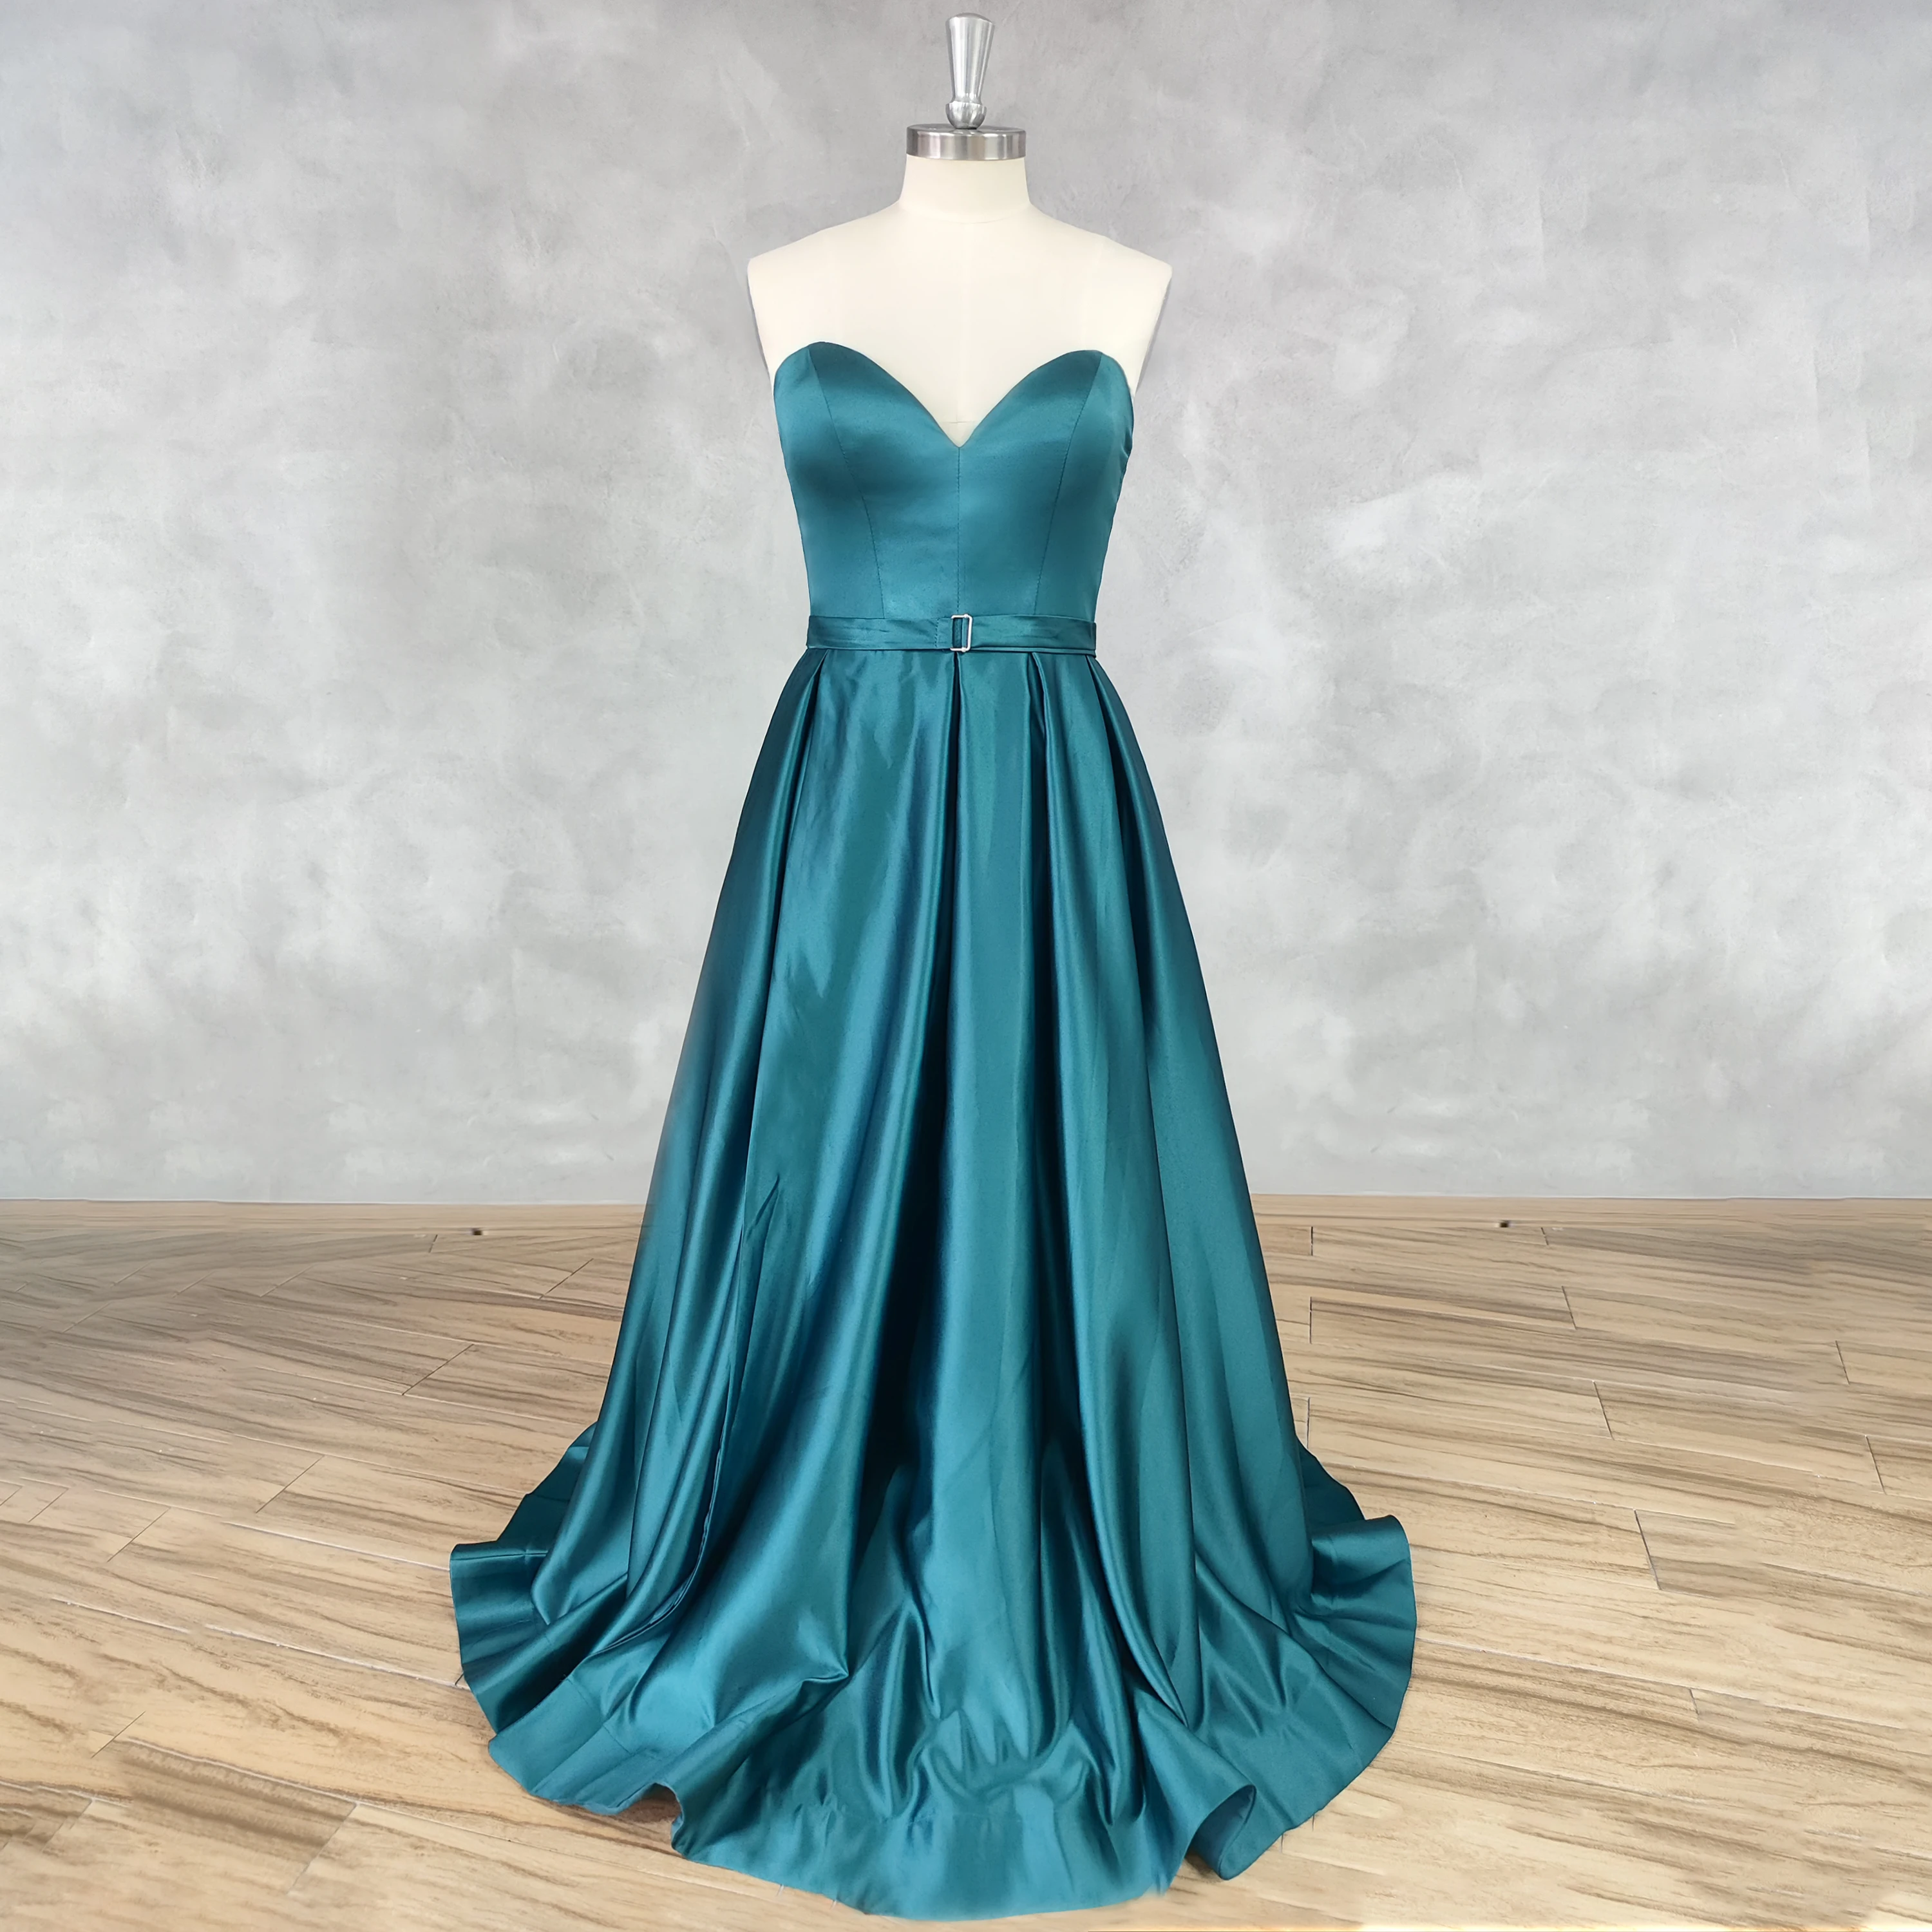 

DIDEYTTAWL Real Photos V-Neck Sleeveless Satin Prom Dress A Line Lace Up Back High Side Slit Floor Length Evening Gown